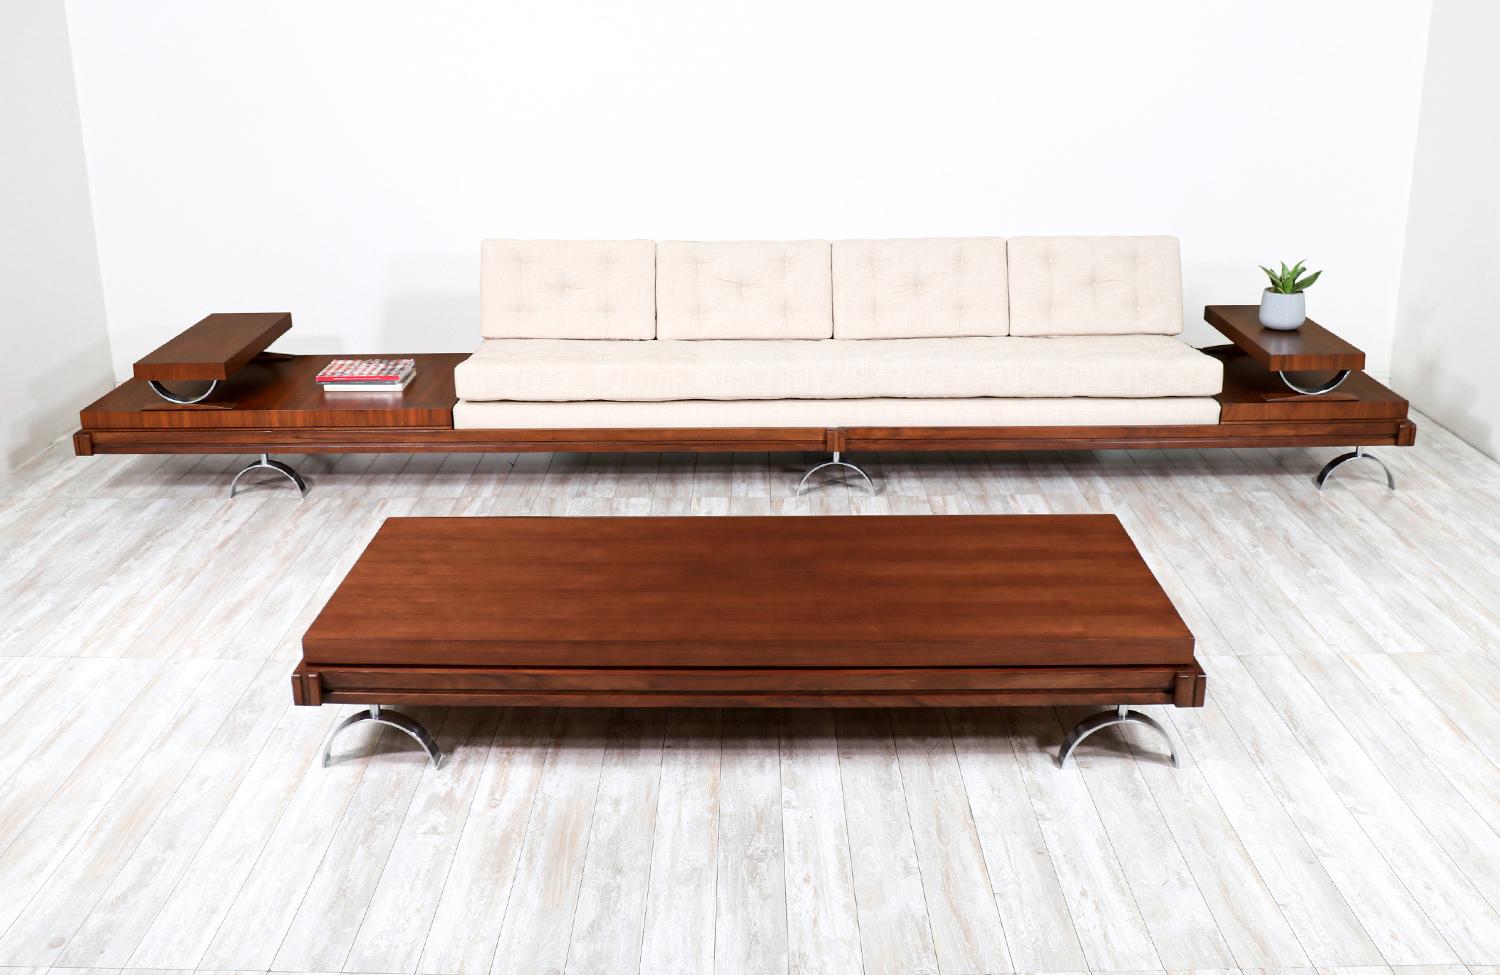 California Modern sofa with coffee table set by Martin Borenstein.

________________________________________

Transforming a piece of Mid-Century Modern furniture is like bringing history back to life, and we take this journey with passion and